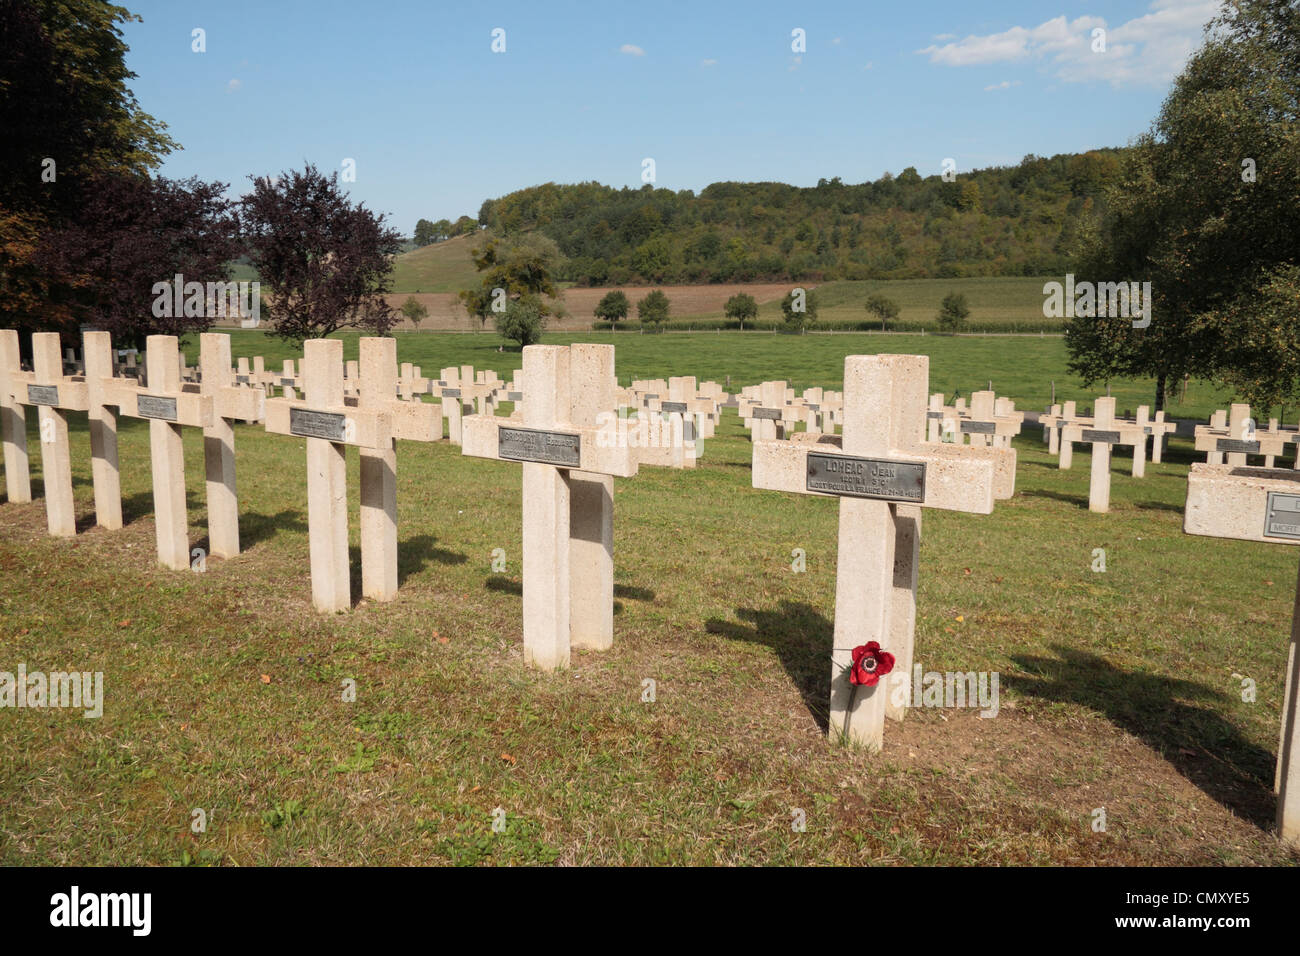 Graves in the Necropolis Nationale Les Éparges (also known as the French National Cemetery du Trottoir), Les Eparges, France. Stock Photo